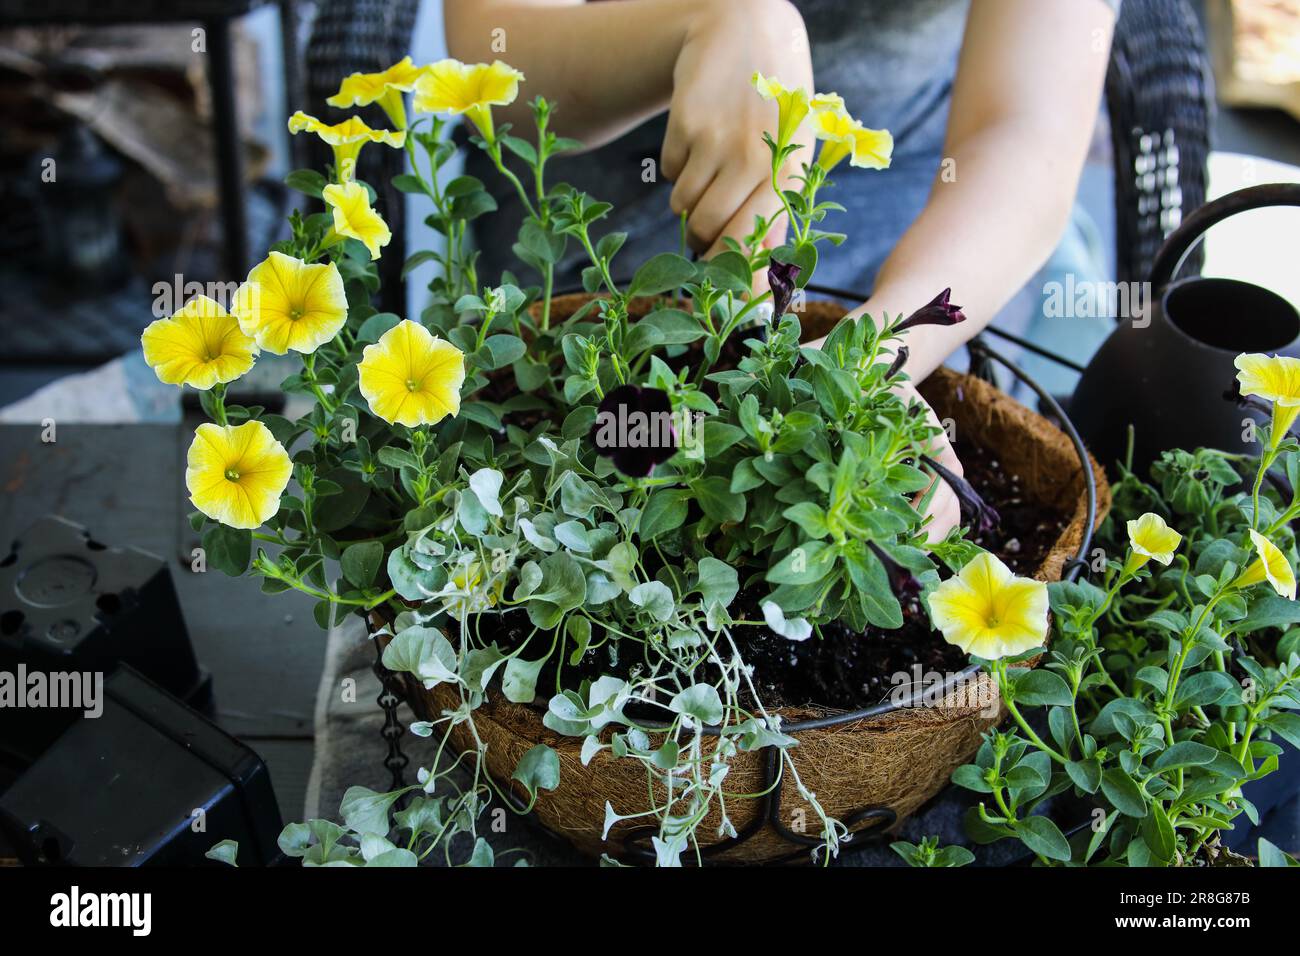 Young woman using a trowel plant a mixed annual hanging basket or pot of flowers. Flowers include yellow and black petunias with dichondra. Stock Photo